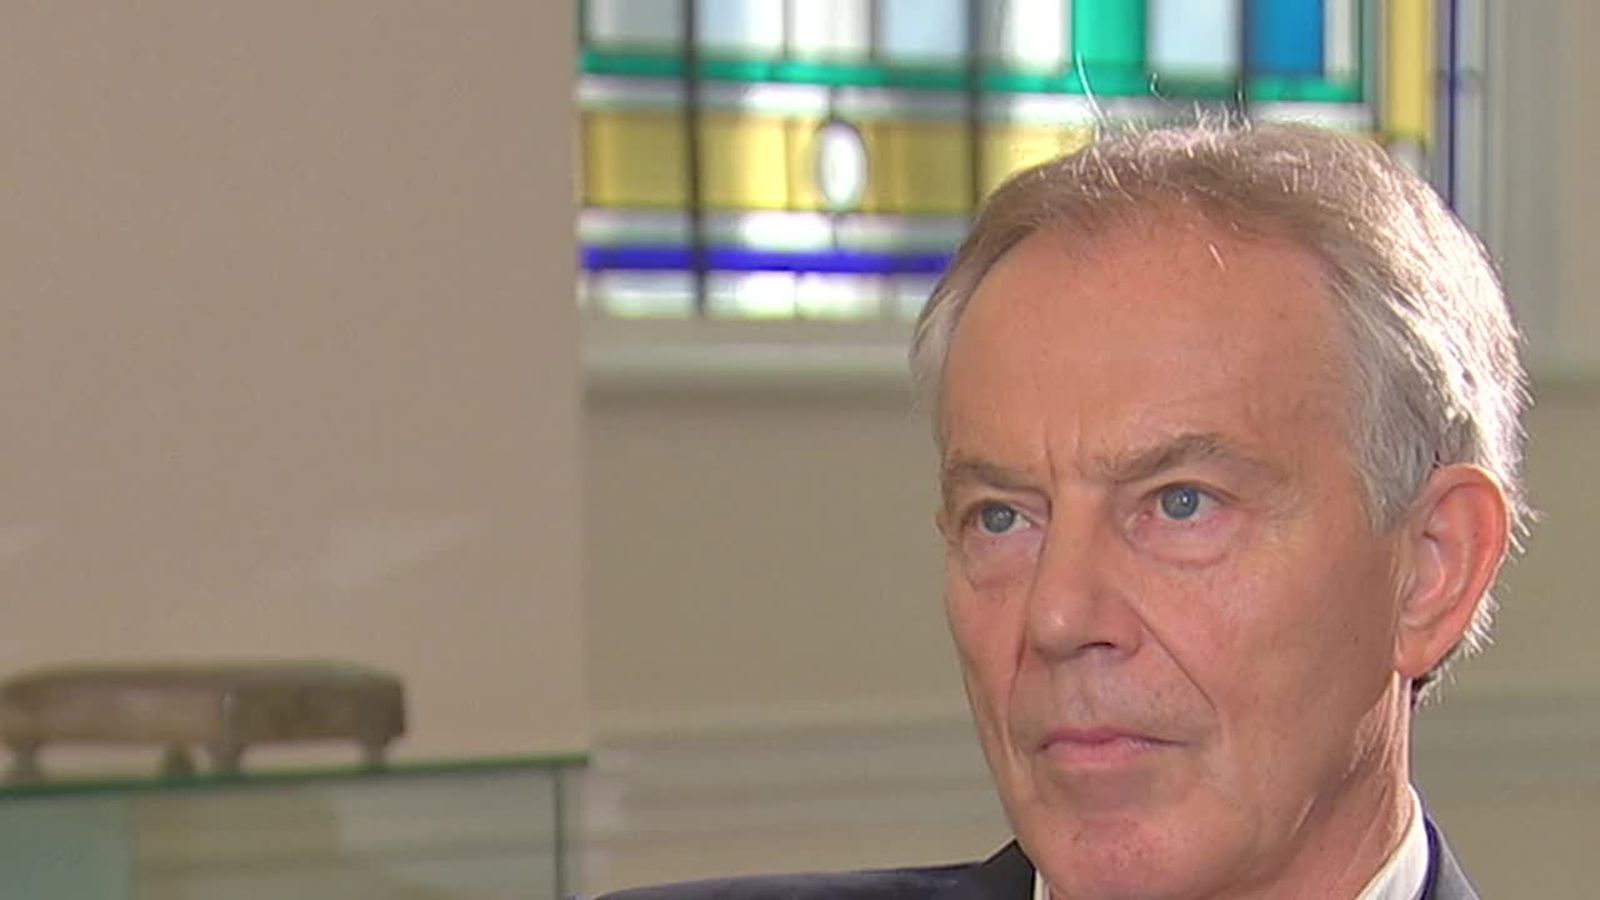 Image result for tony blair brexit interview sophy ridge